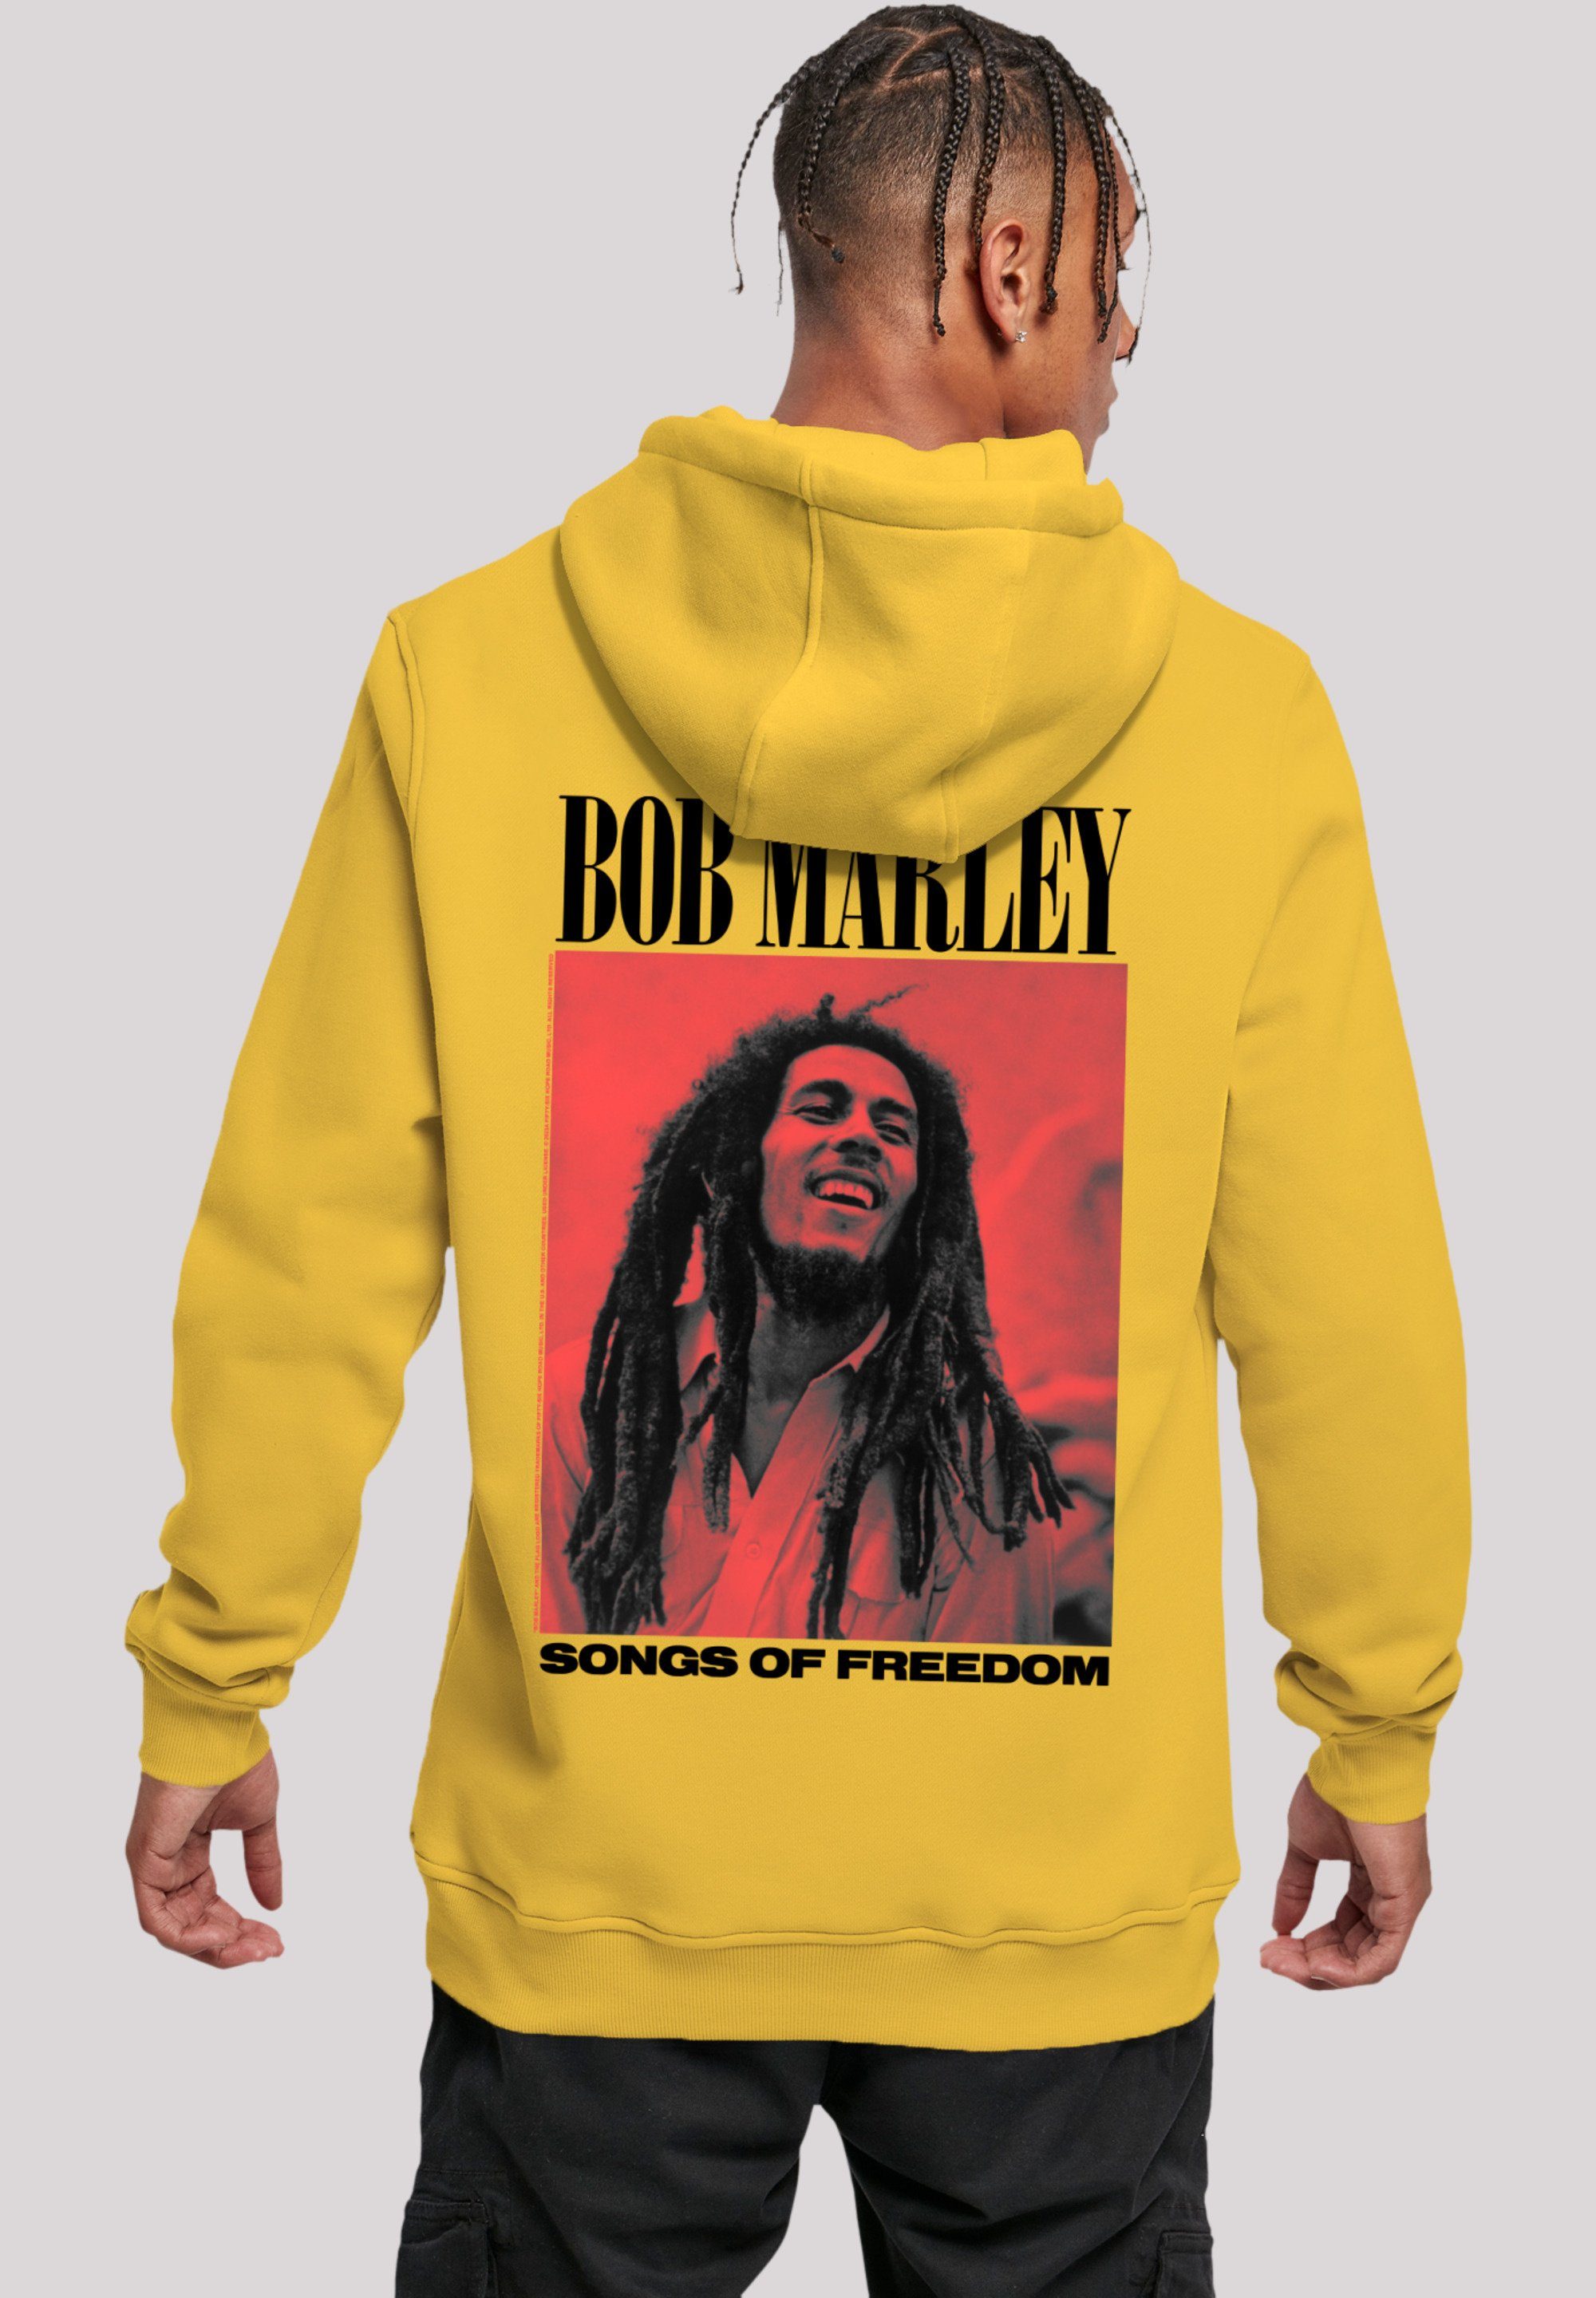 Music Musik, Off Of Songs Qualität, Freedom Marley Bob By F4NT4STIC Reggae yellow Hoodie Rock Premium taxi